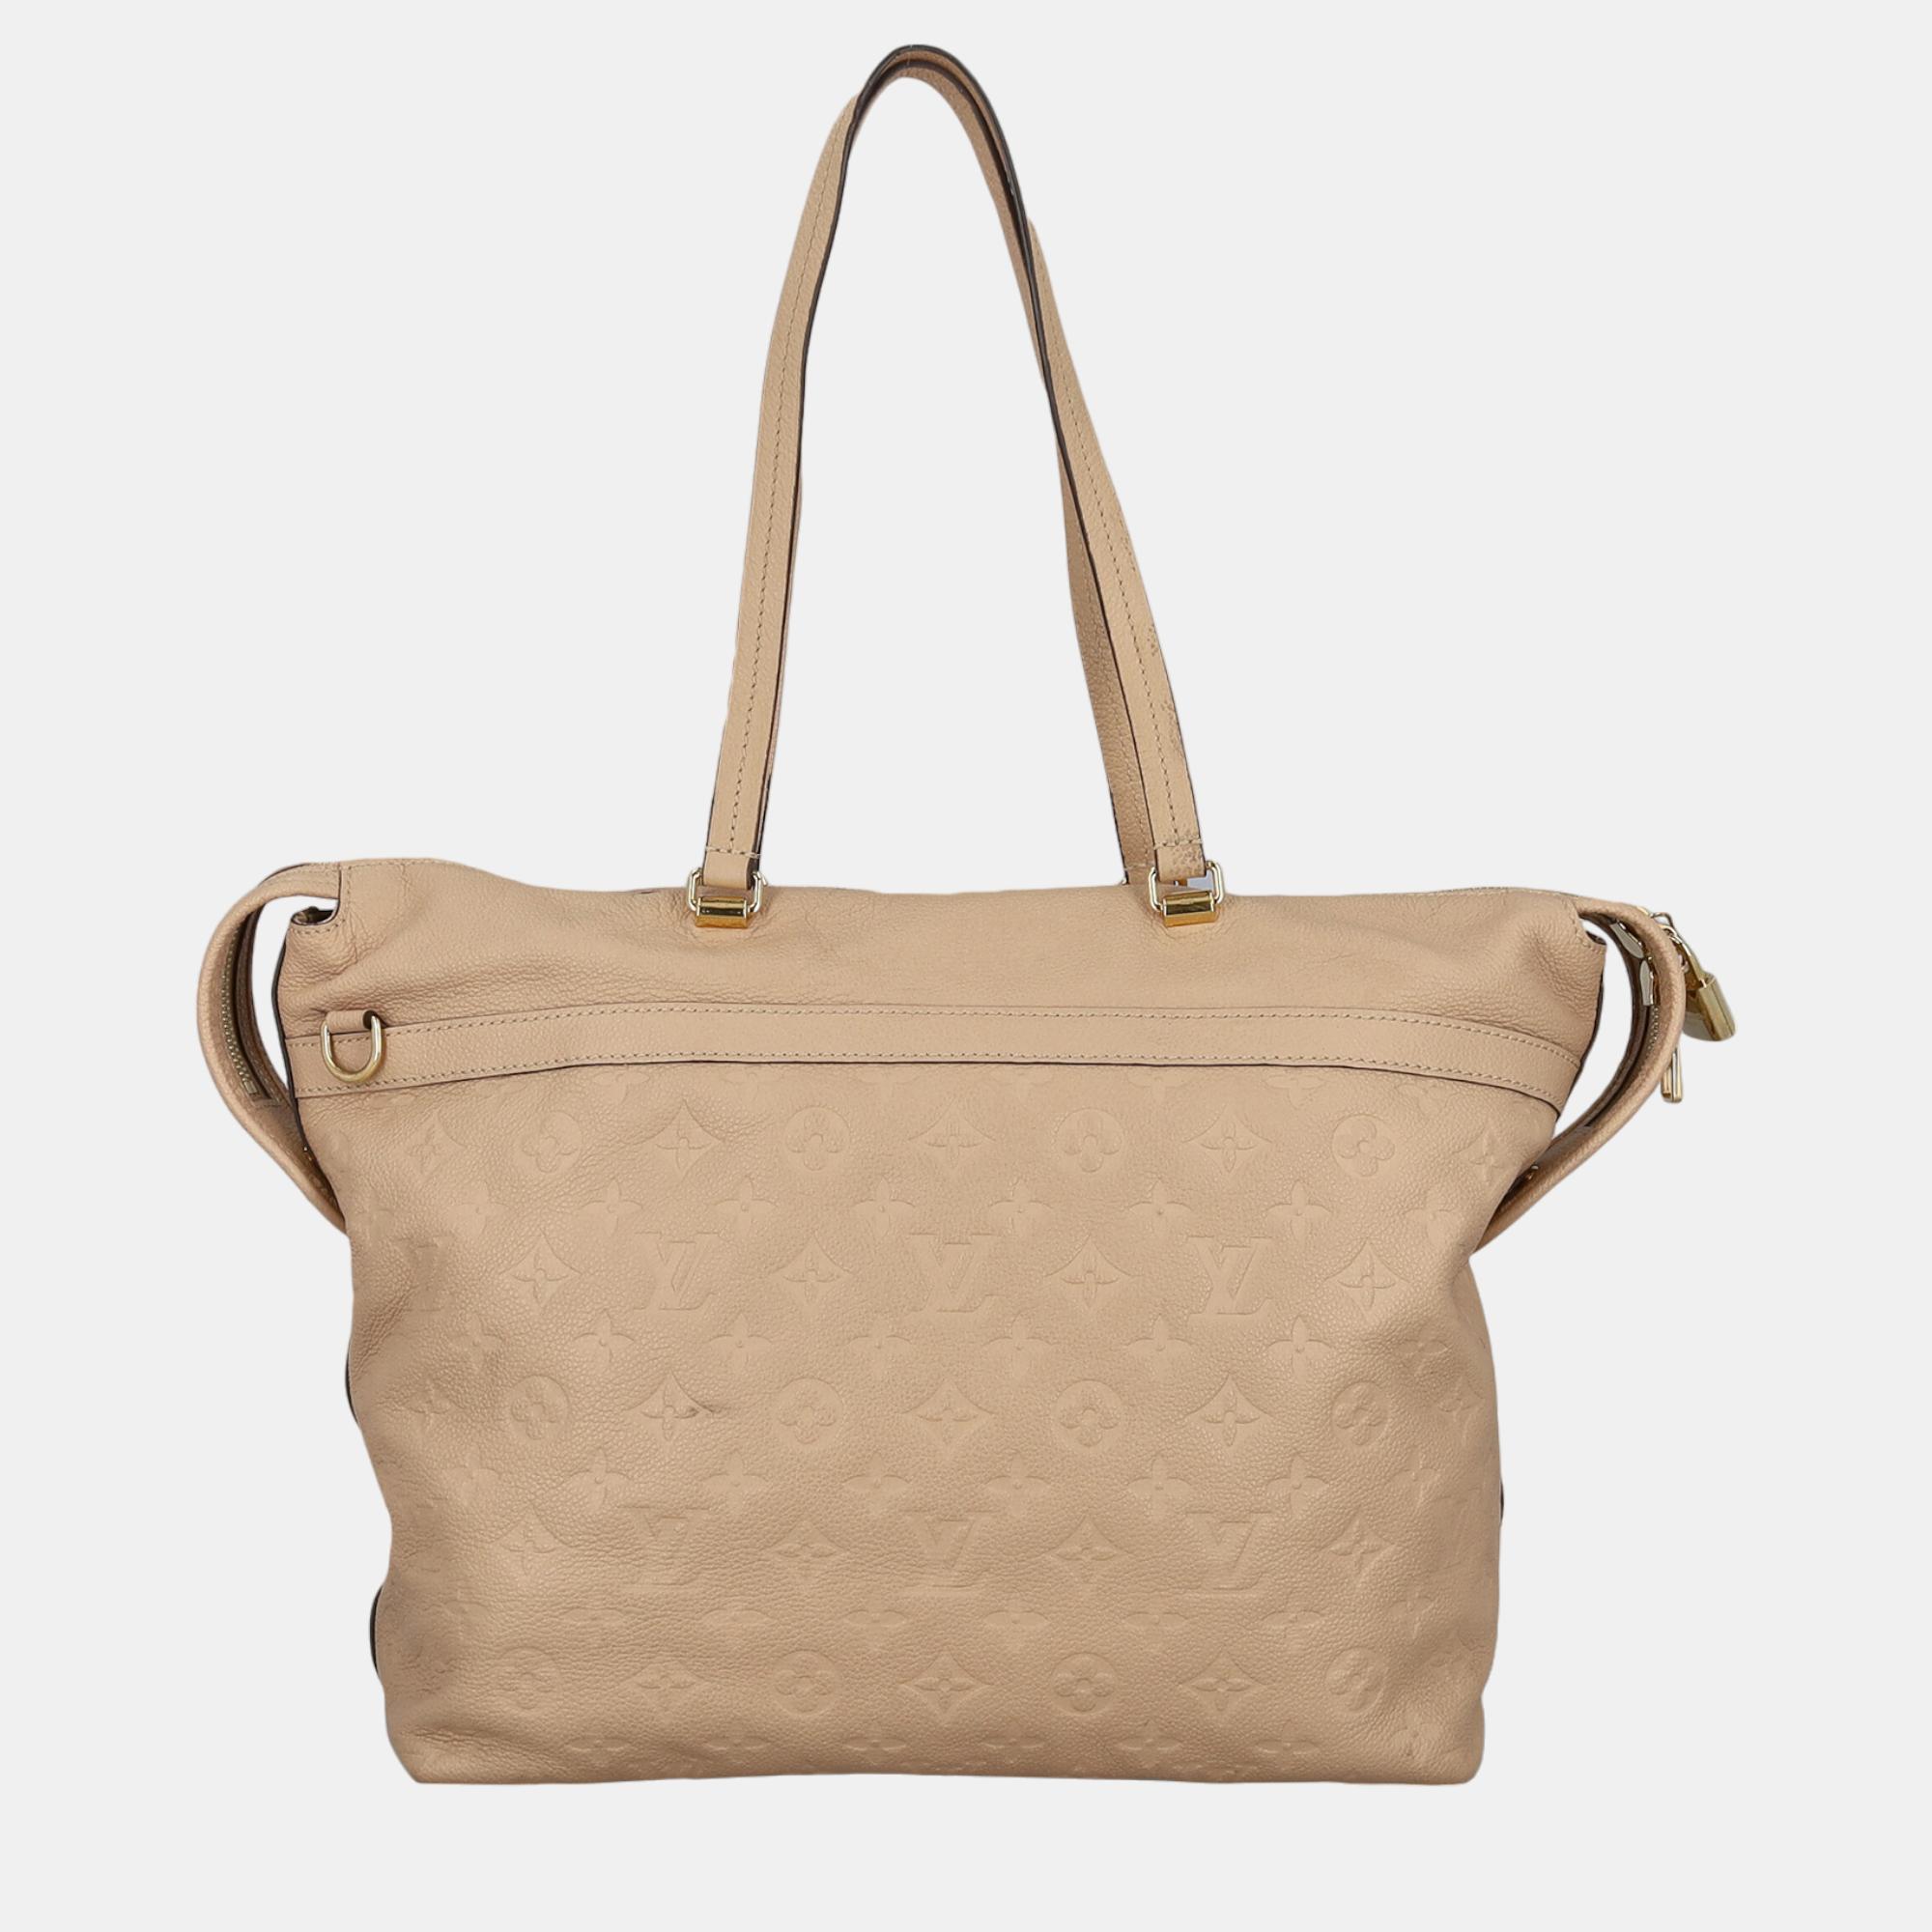 Louis Vuitton  Women's Leather Tote Bag - Beige - One Size